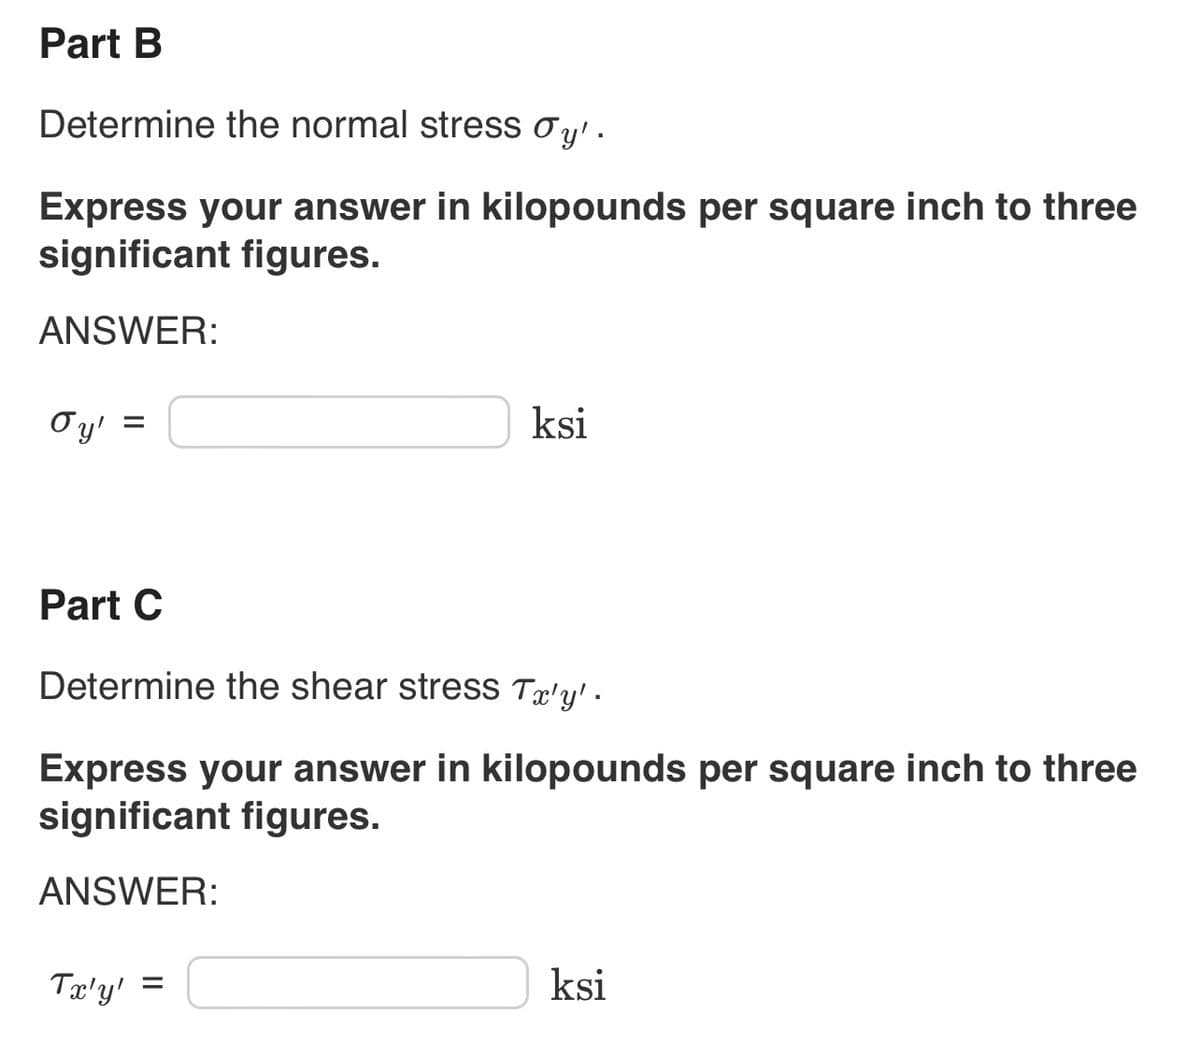 Part B
Determine the normal stress Øy'.
Express your answer in kilopounds per square inch to three
significant figures.
ANSWER:
oy'
=
ksi
Part C
Determine the shear stress Tx'y' .
Express your answer in kilopounds per square inch to three
significant figures.
ANSWER:
Tx'y' =
ksi